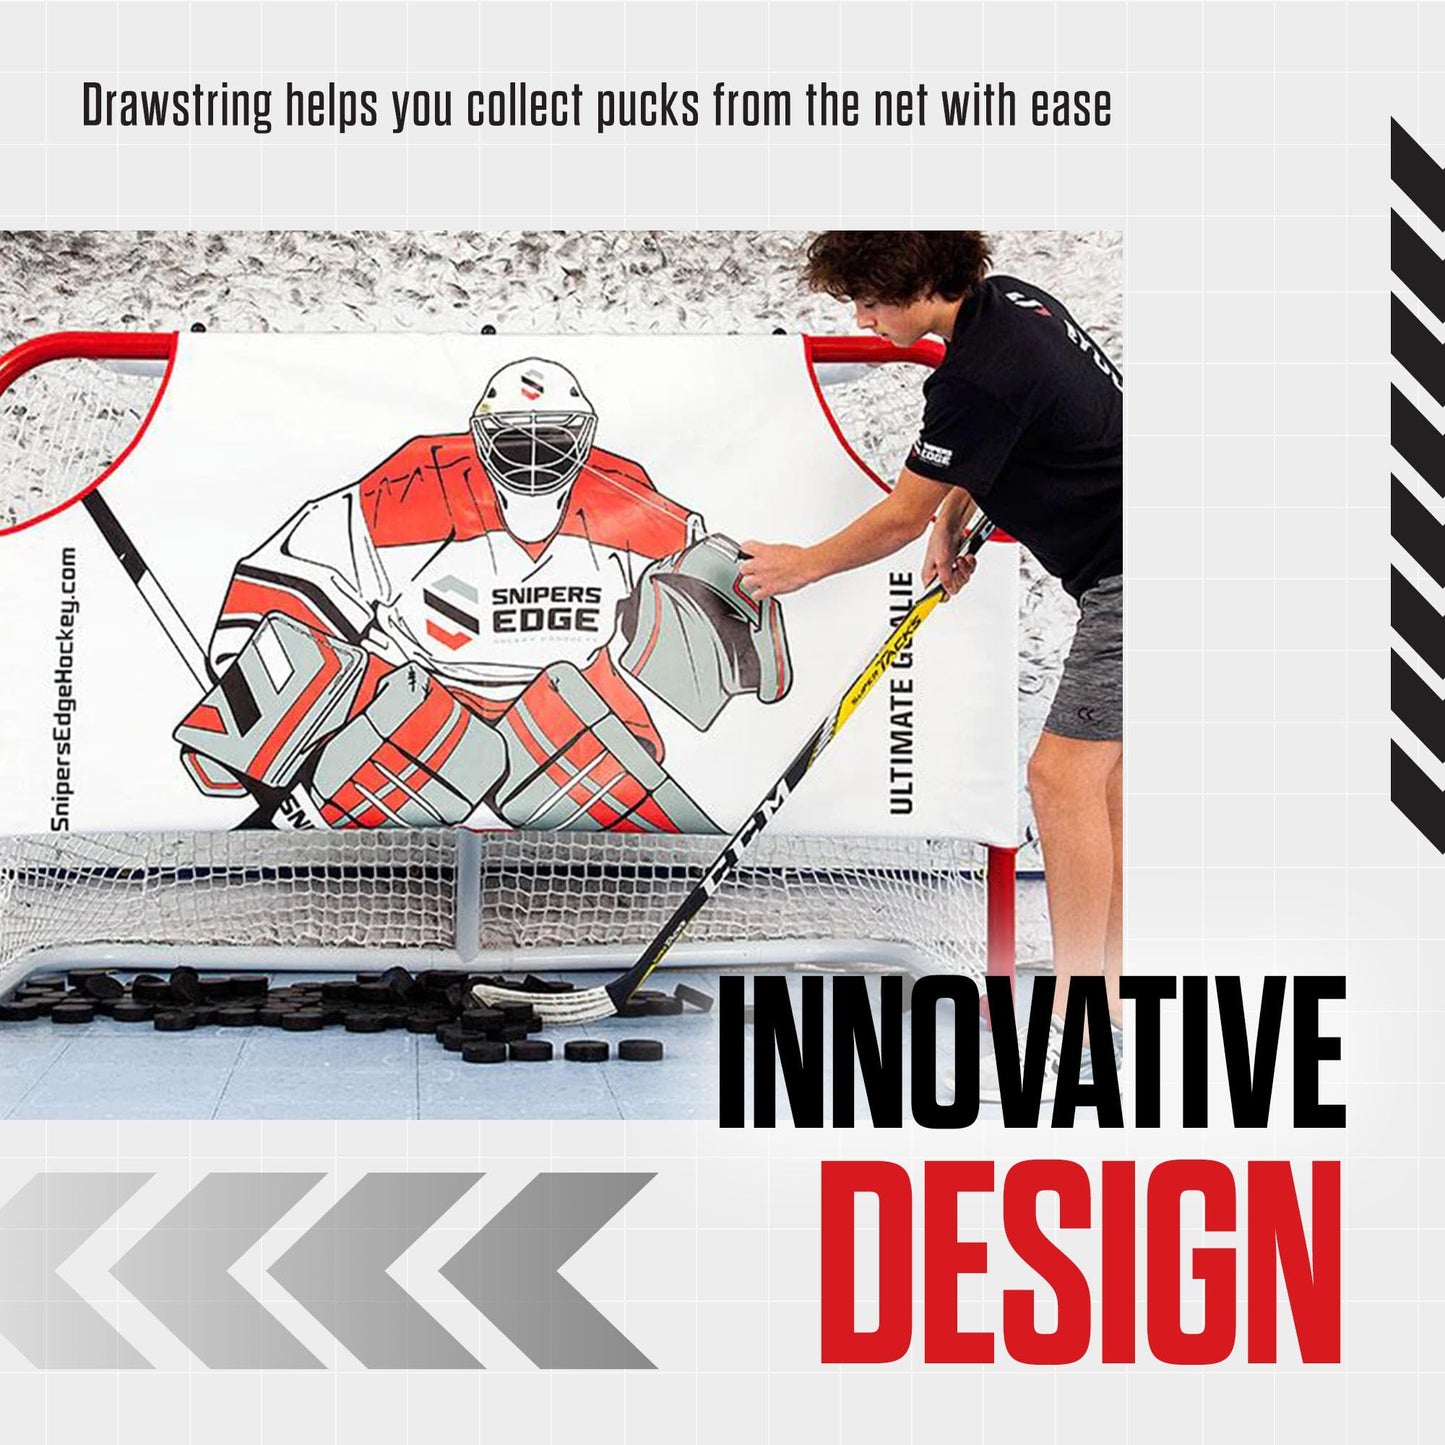 Snipers Edge Hockey - Ultimate Goalie Shooter Tutor - Fits Inside Goal - Long Lasting Durability with Its Impact Resistant Vinyl